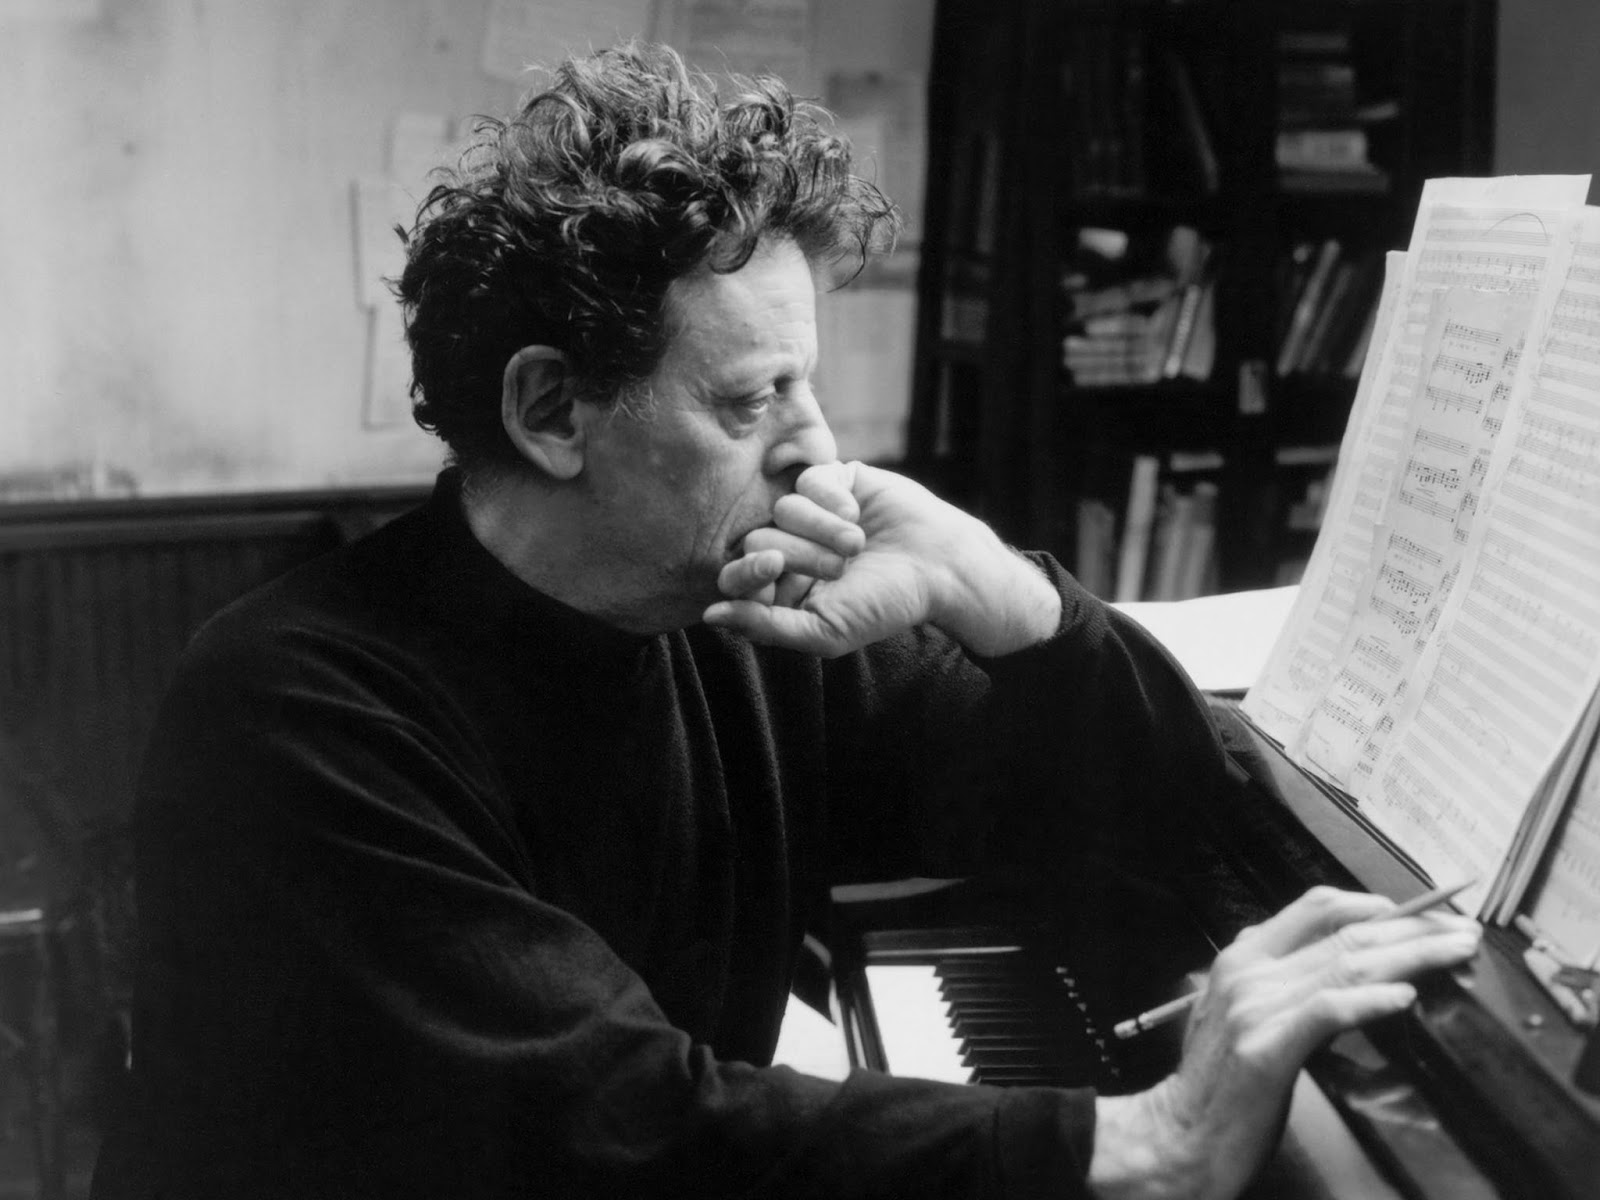 DRAGON Portrait of the artist / Philip Glass / Nobody makes you choose